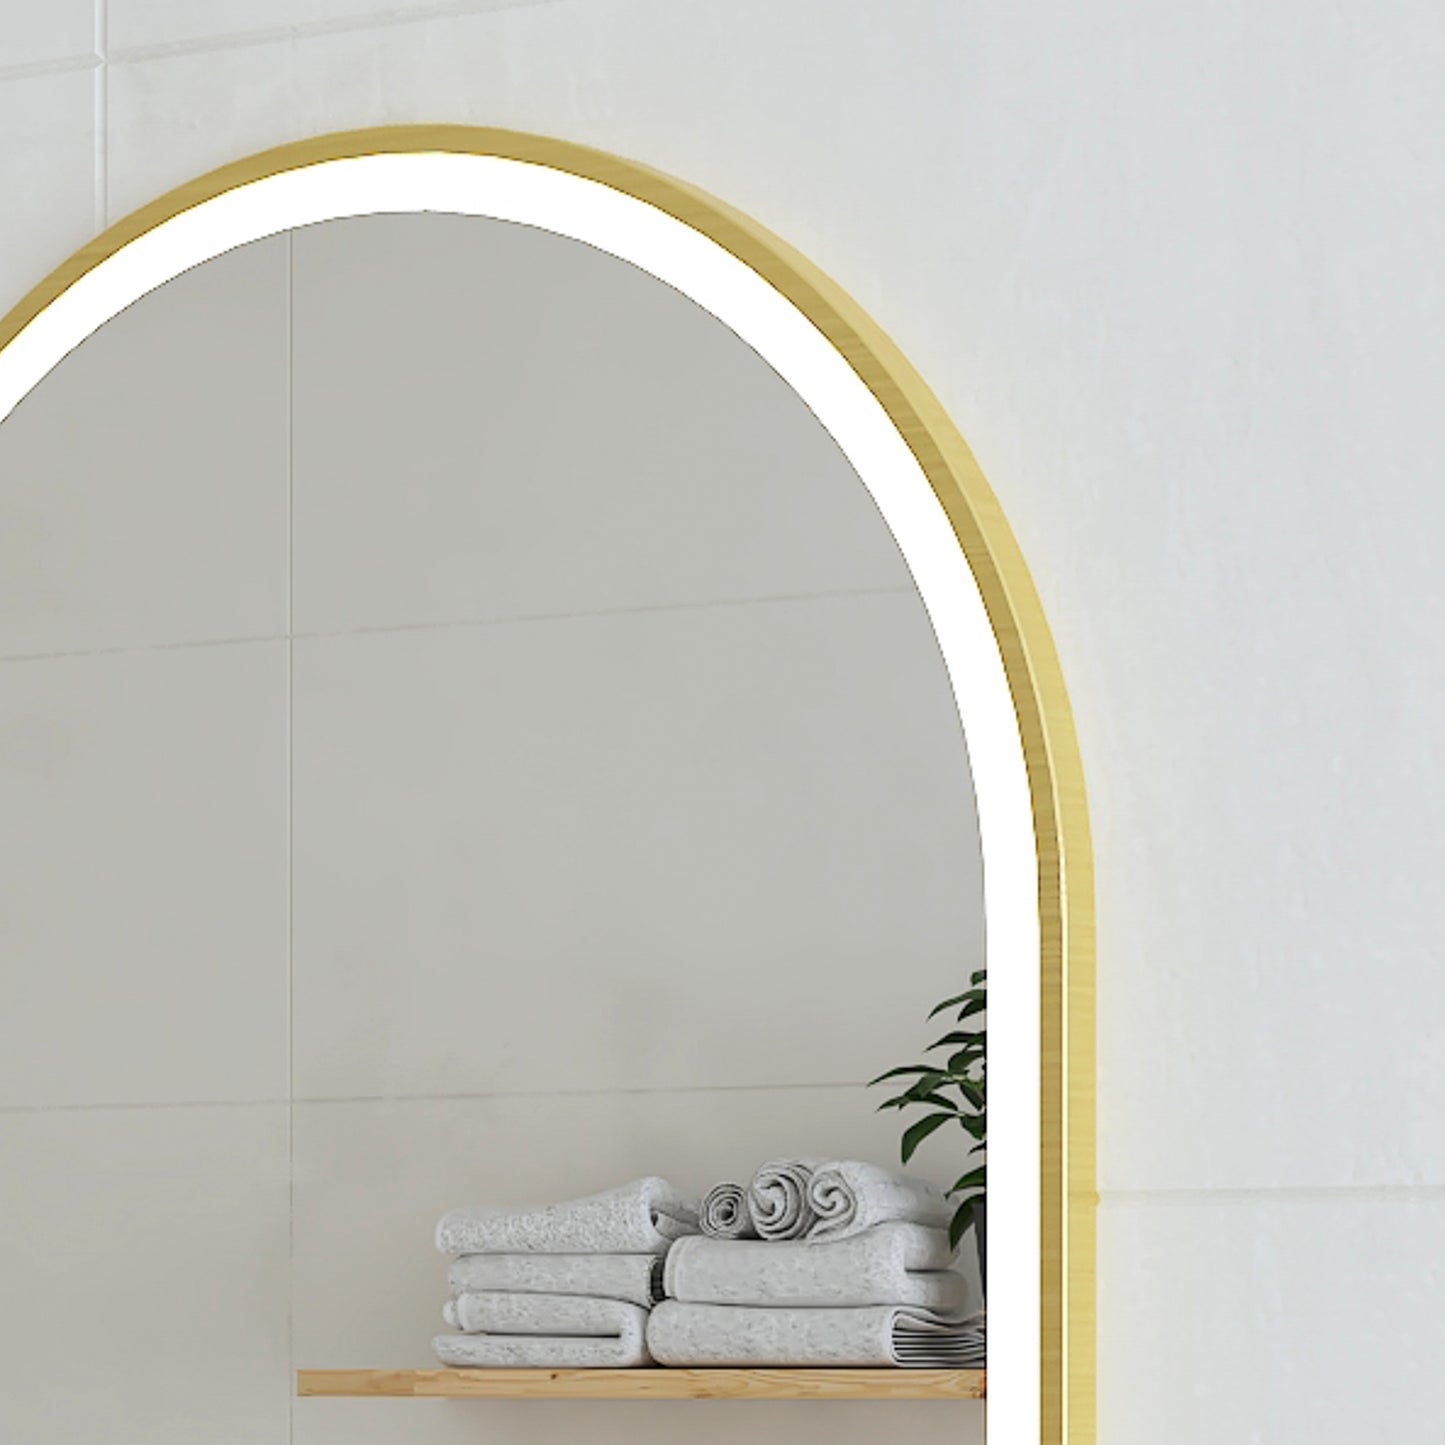 Arco Arch 500mm x 1000mm Frontlit LED Framed Mirror in Brushed Brass (Gold) with Demister